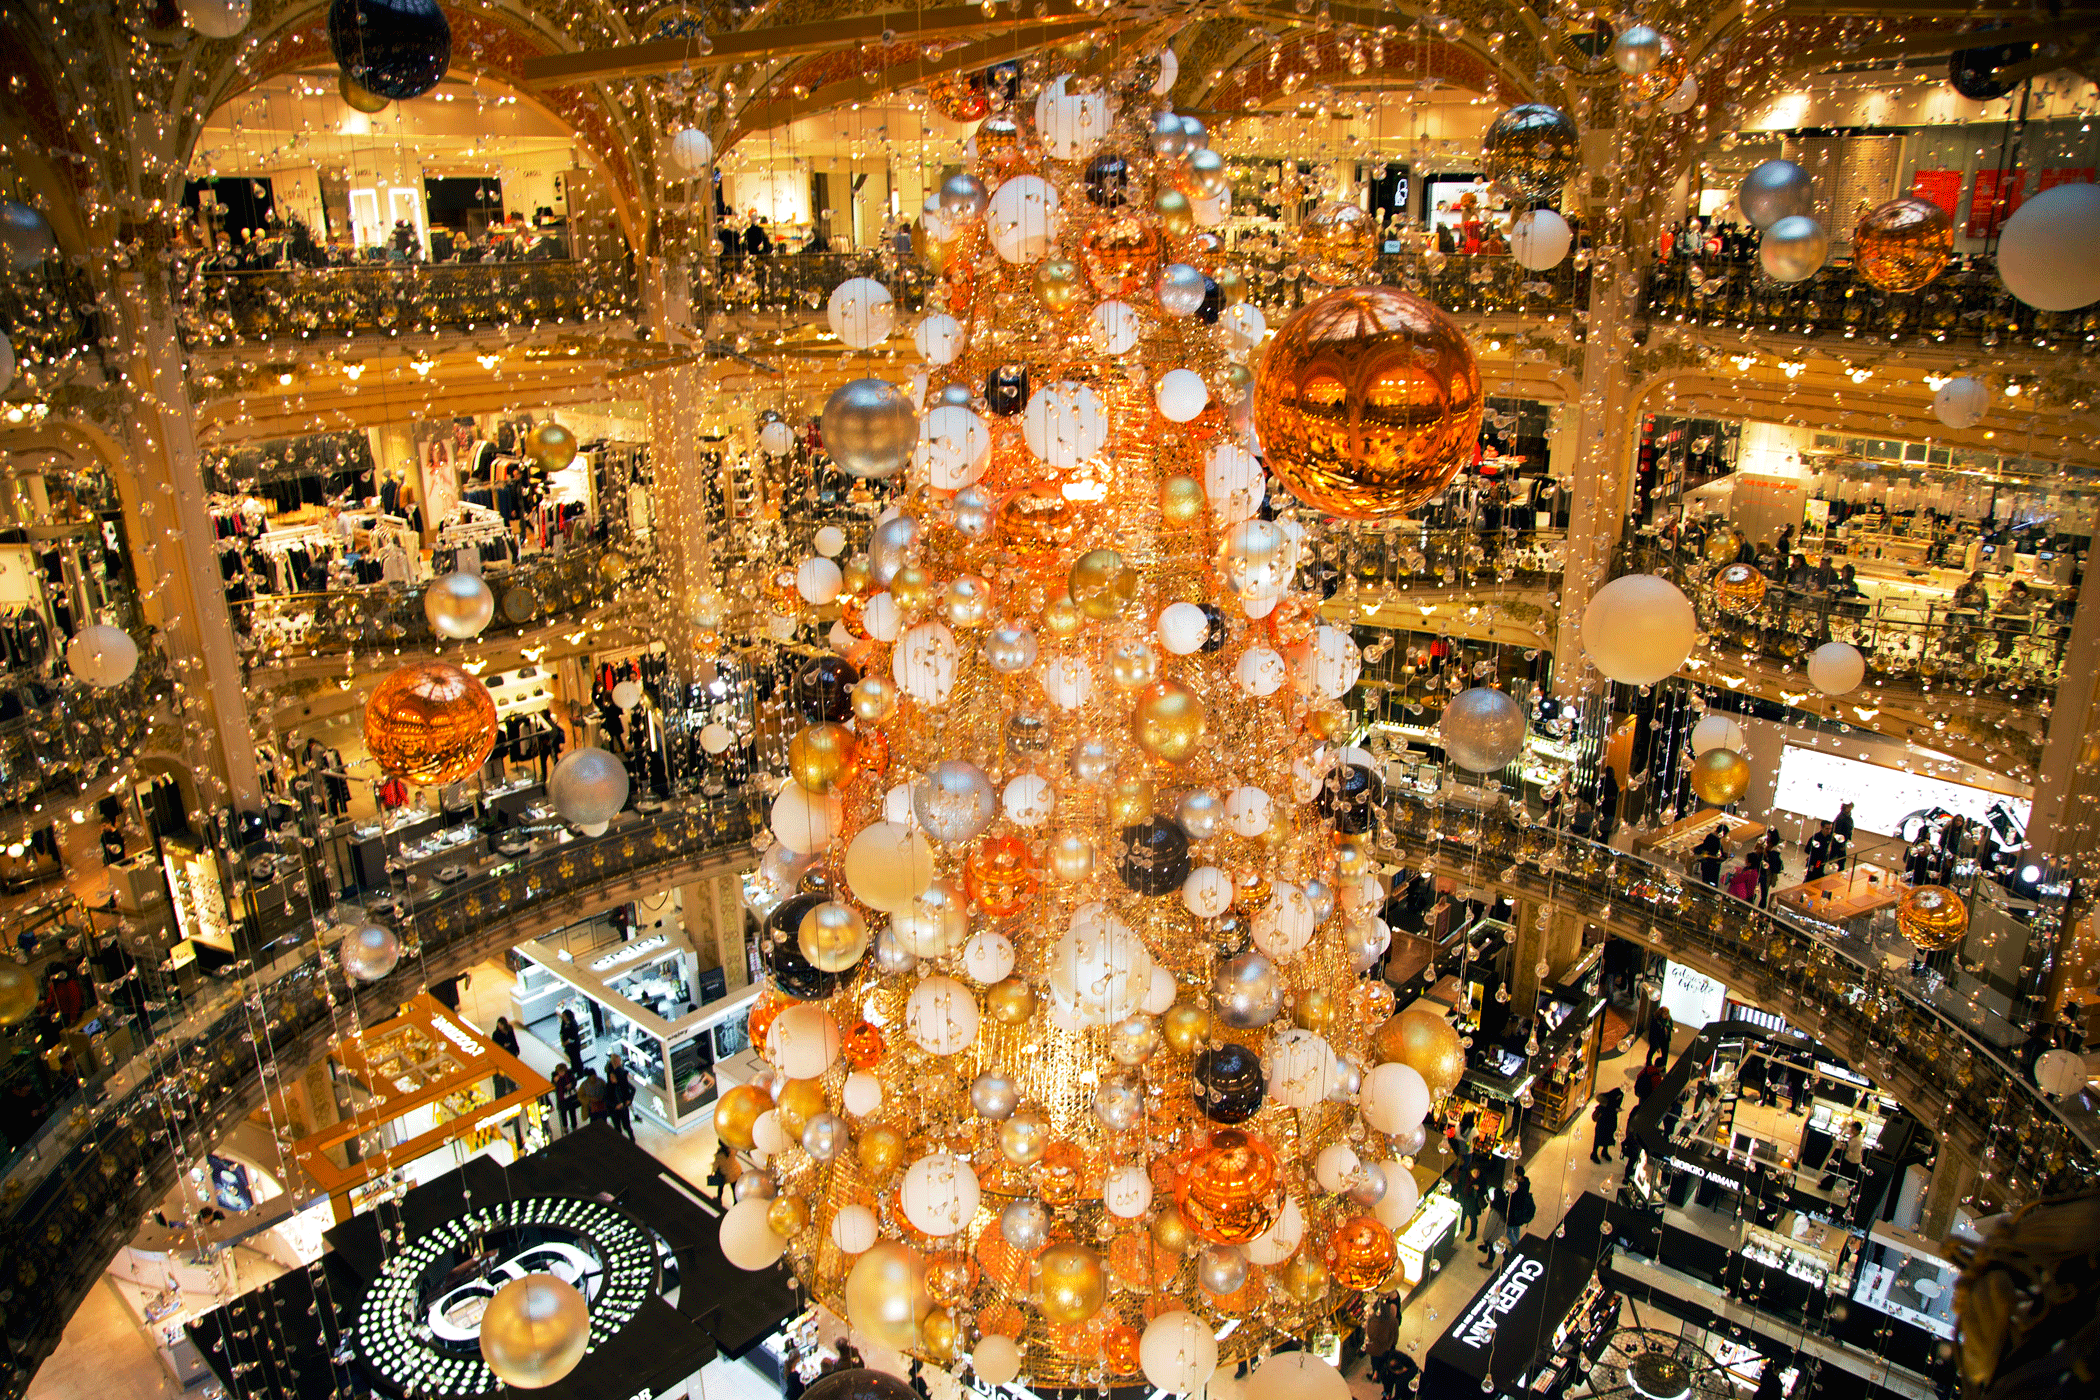 A Christmas tree on display at a Paris department store on Dec. 22, 2015.